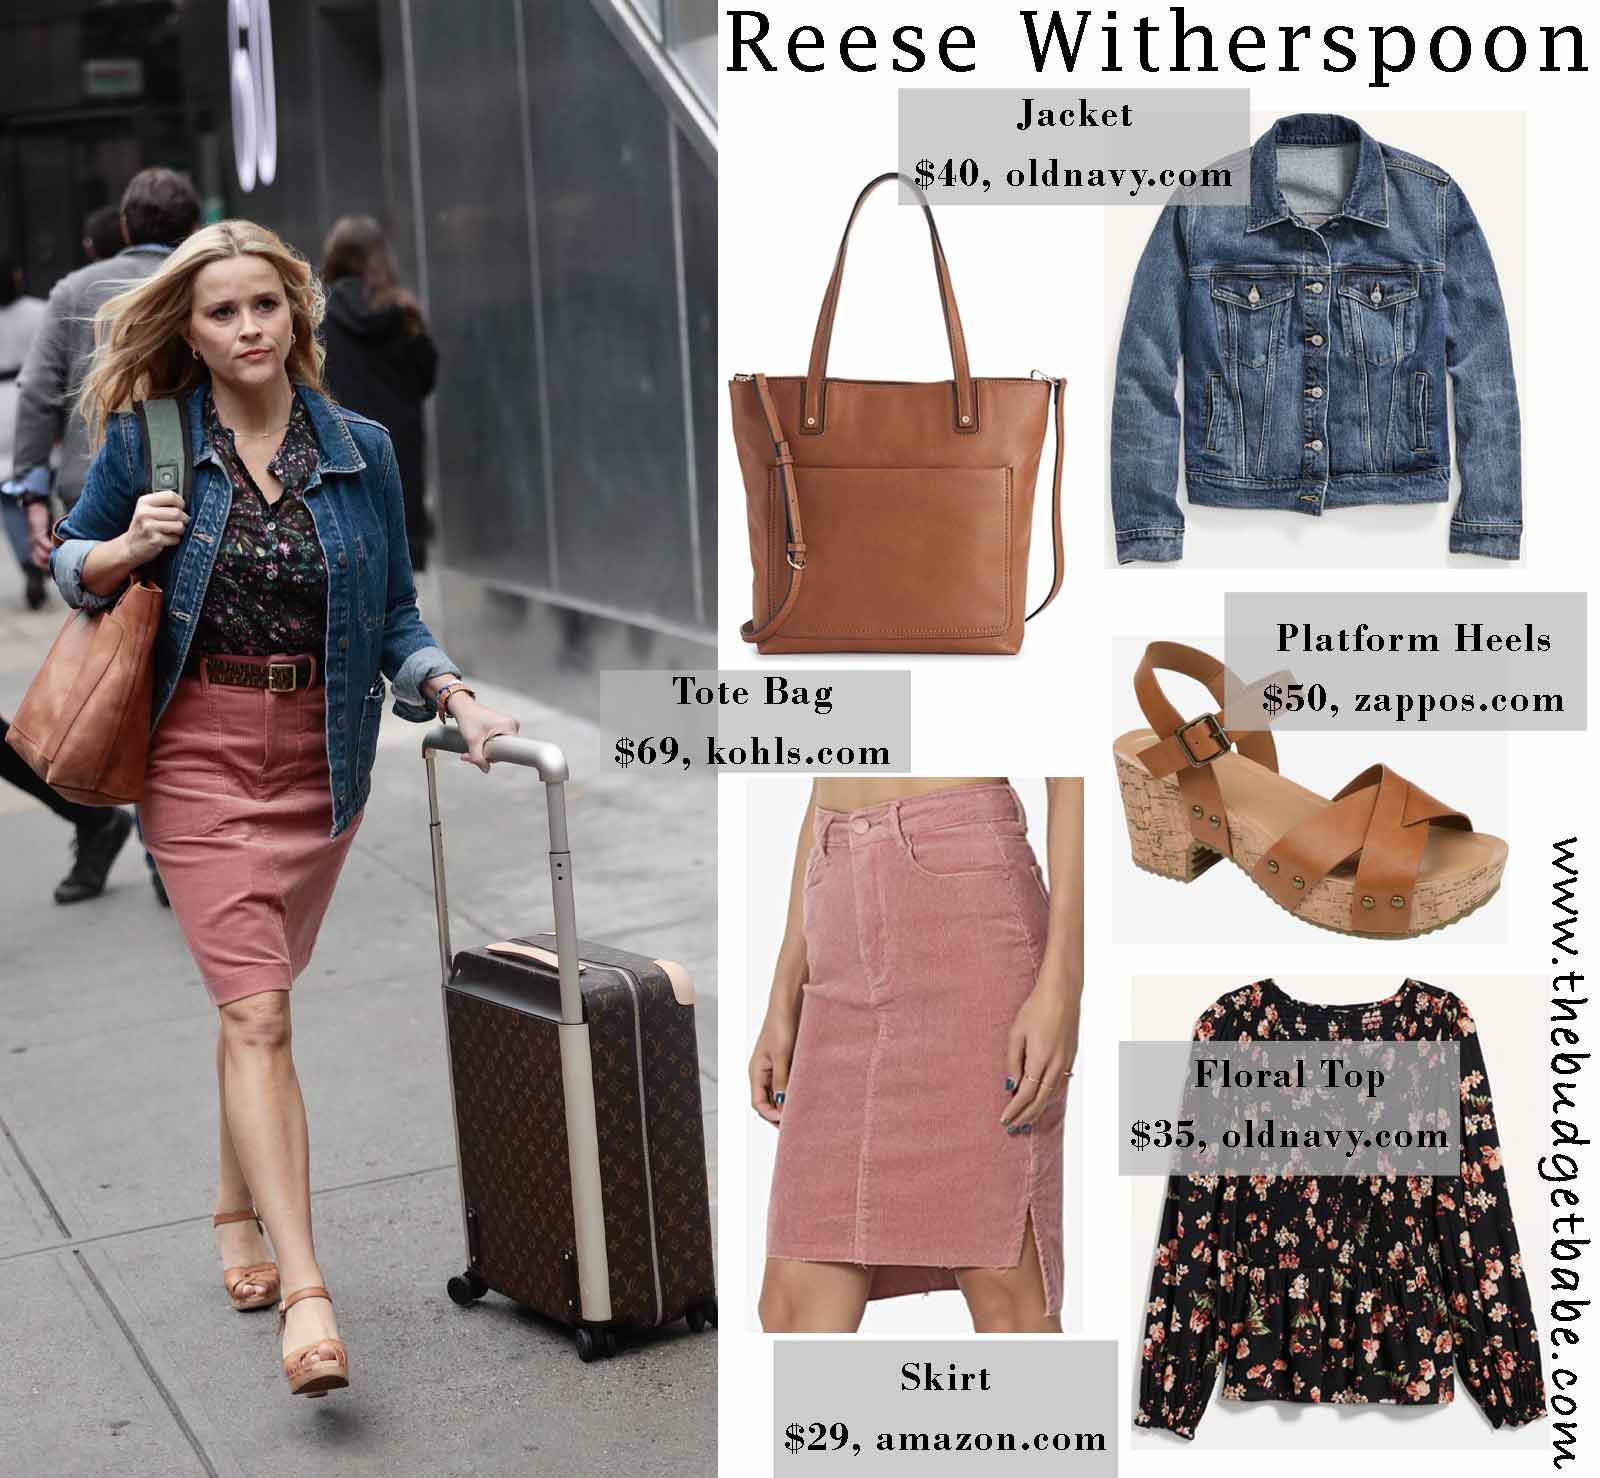 Reese Witherspoon's Denim Jacket and Pink Pencil Skirt Look for Less